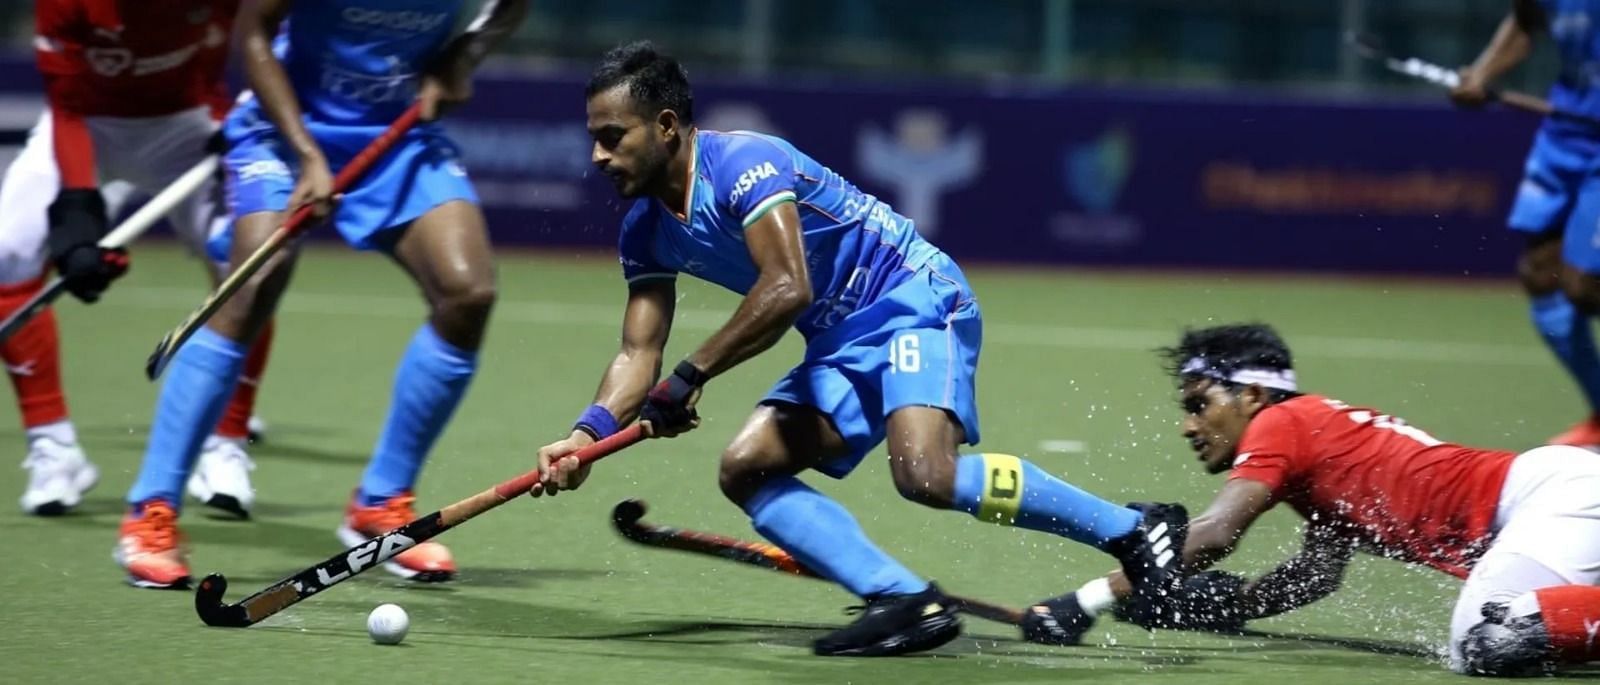 Indian captain Uttam Singh in action against Malaysia (Image Credits: Hockey India)